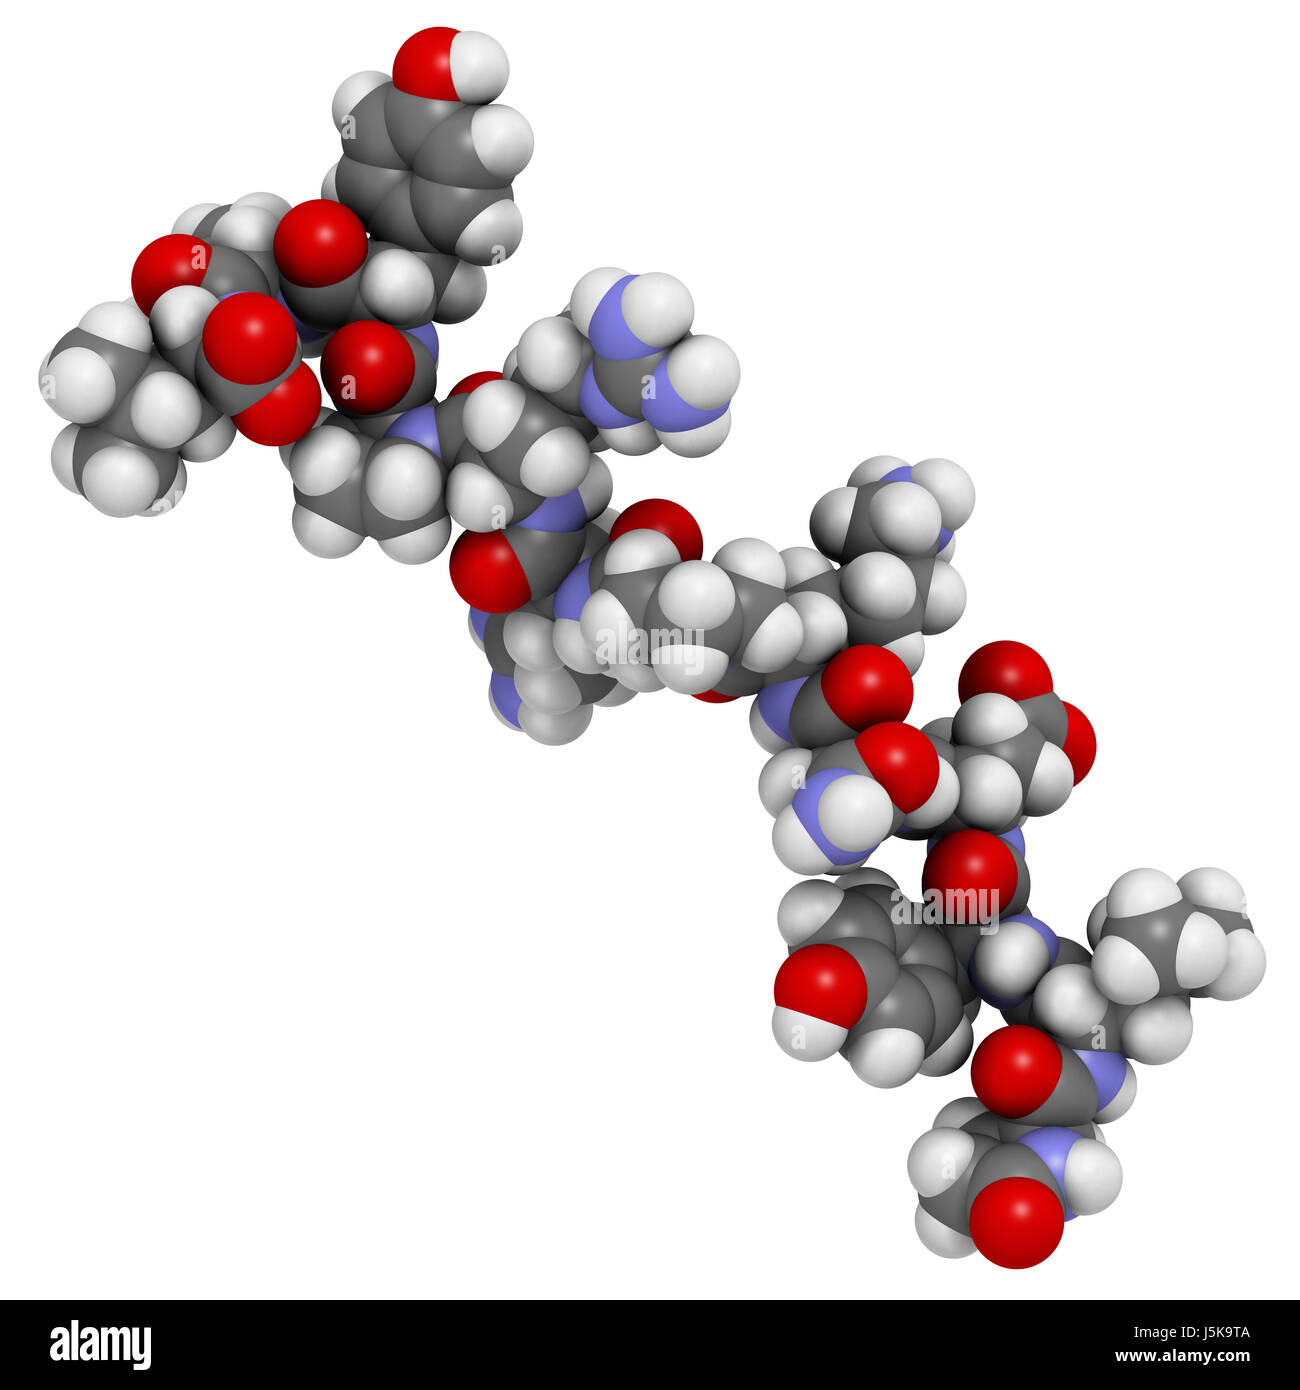 Neurotensin neurotransmitter peptide (Q1E mutated). 3D rendering based on protein data bank entry 2lne. Atoms are represented as spheres. Stock Photo